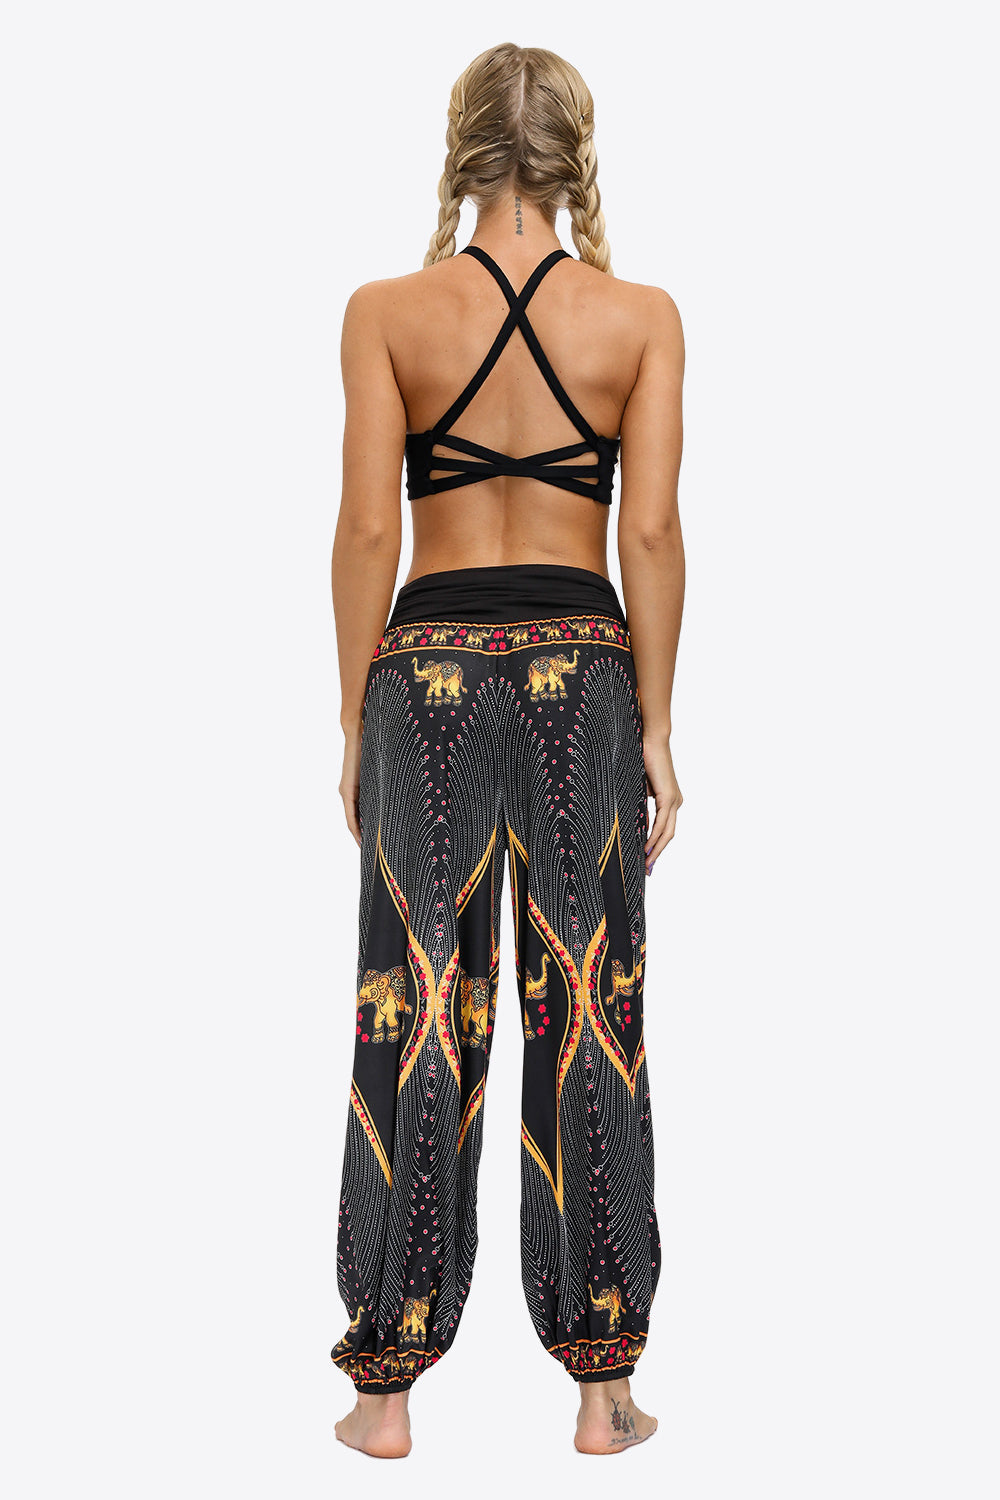 Exotic Style Printed Ruched Pants - Pants - FITGGINS